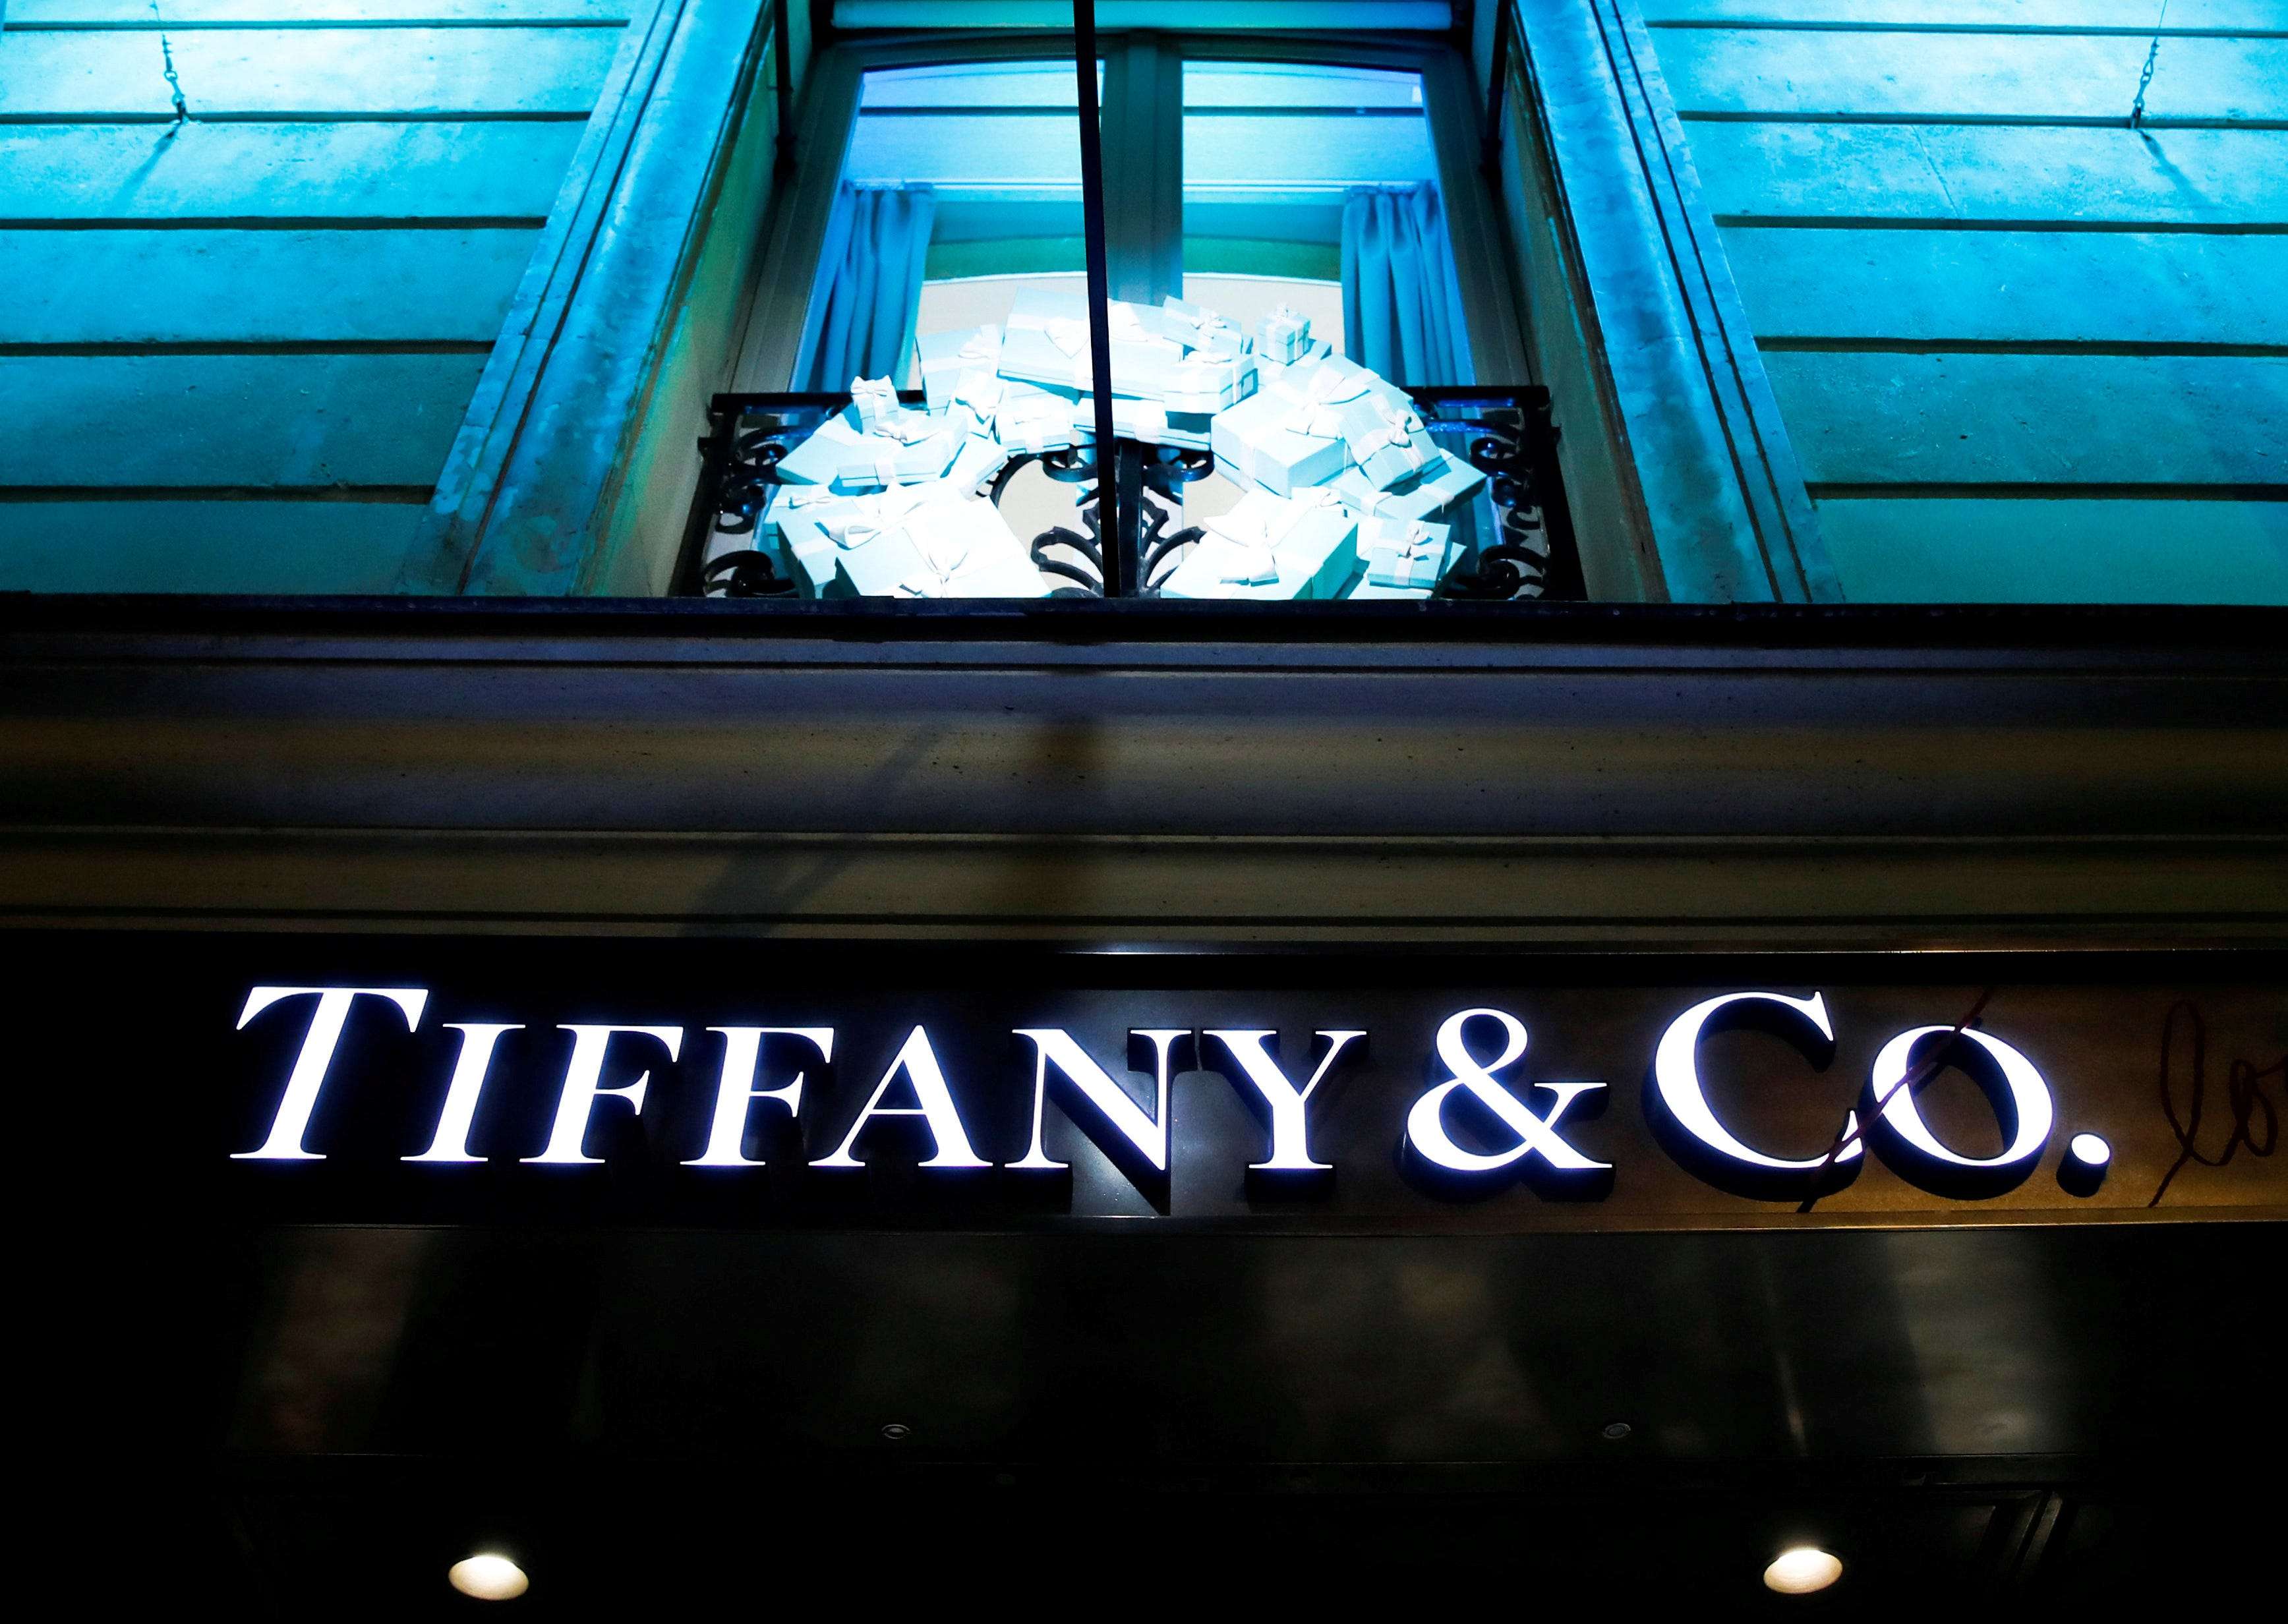 Louis Vuitton owner LVMH pulls out of its $16 billion takeover of Tiffany & Co. | Business ...